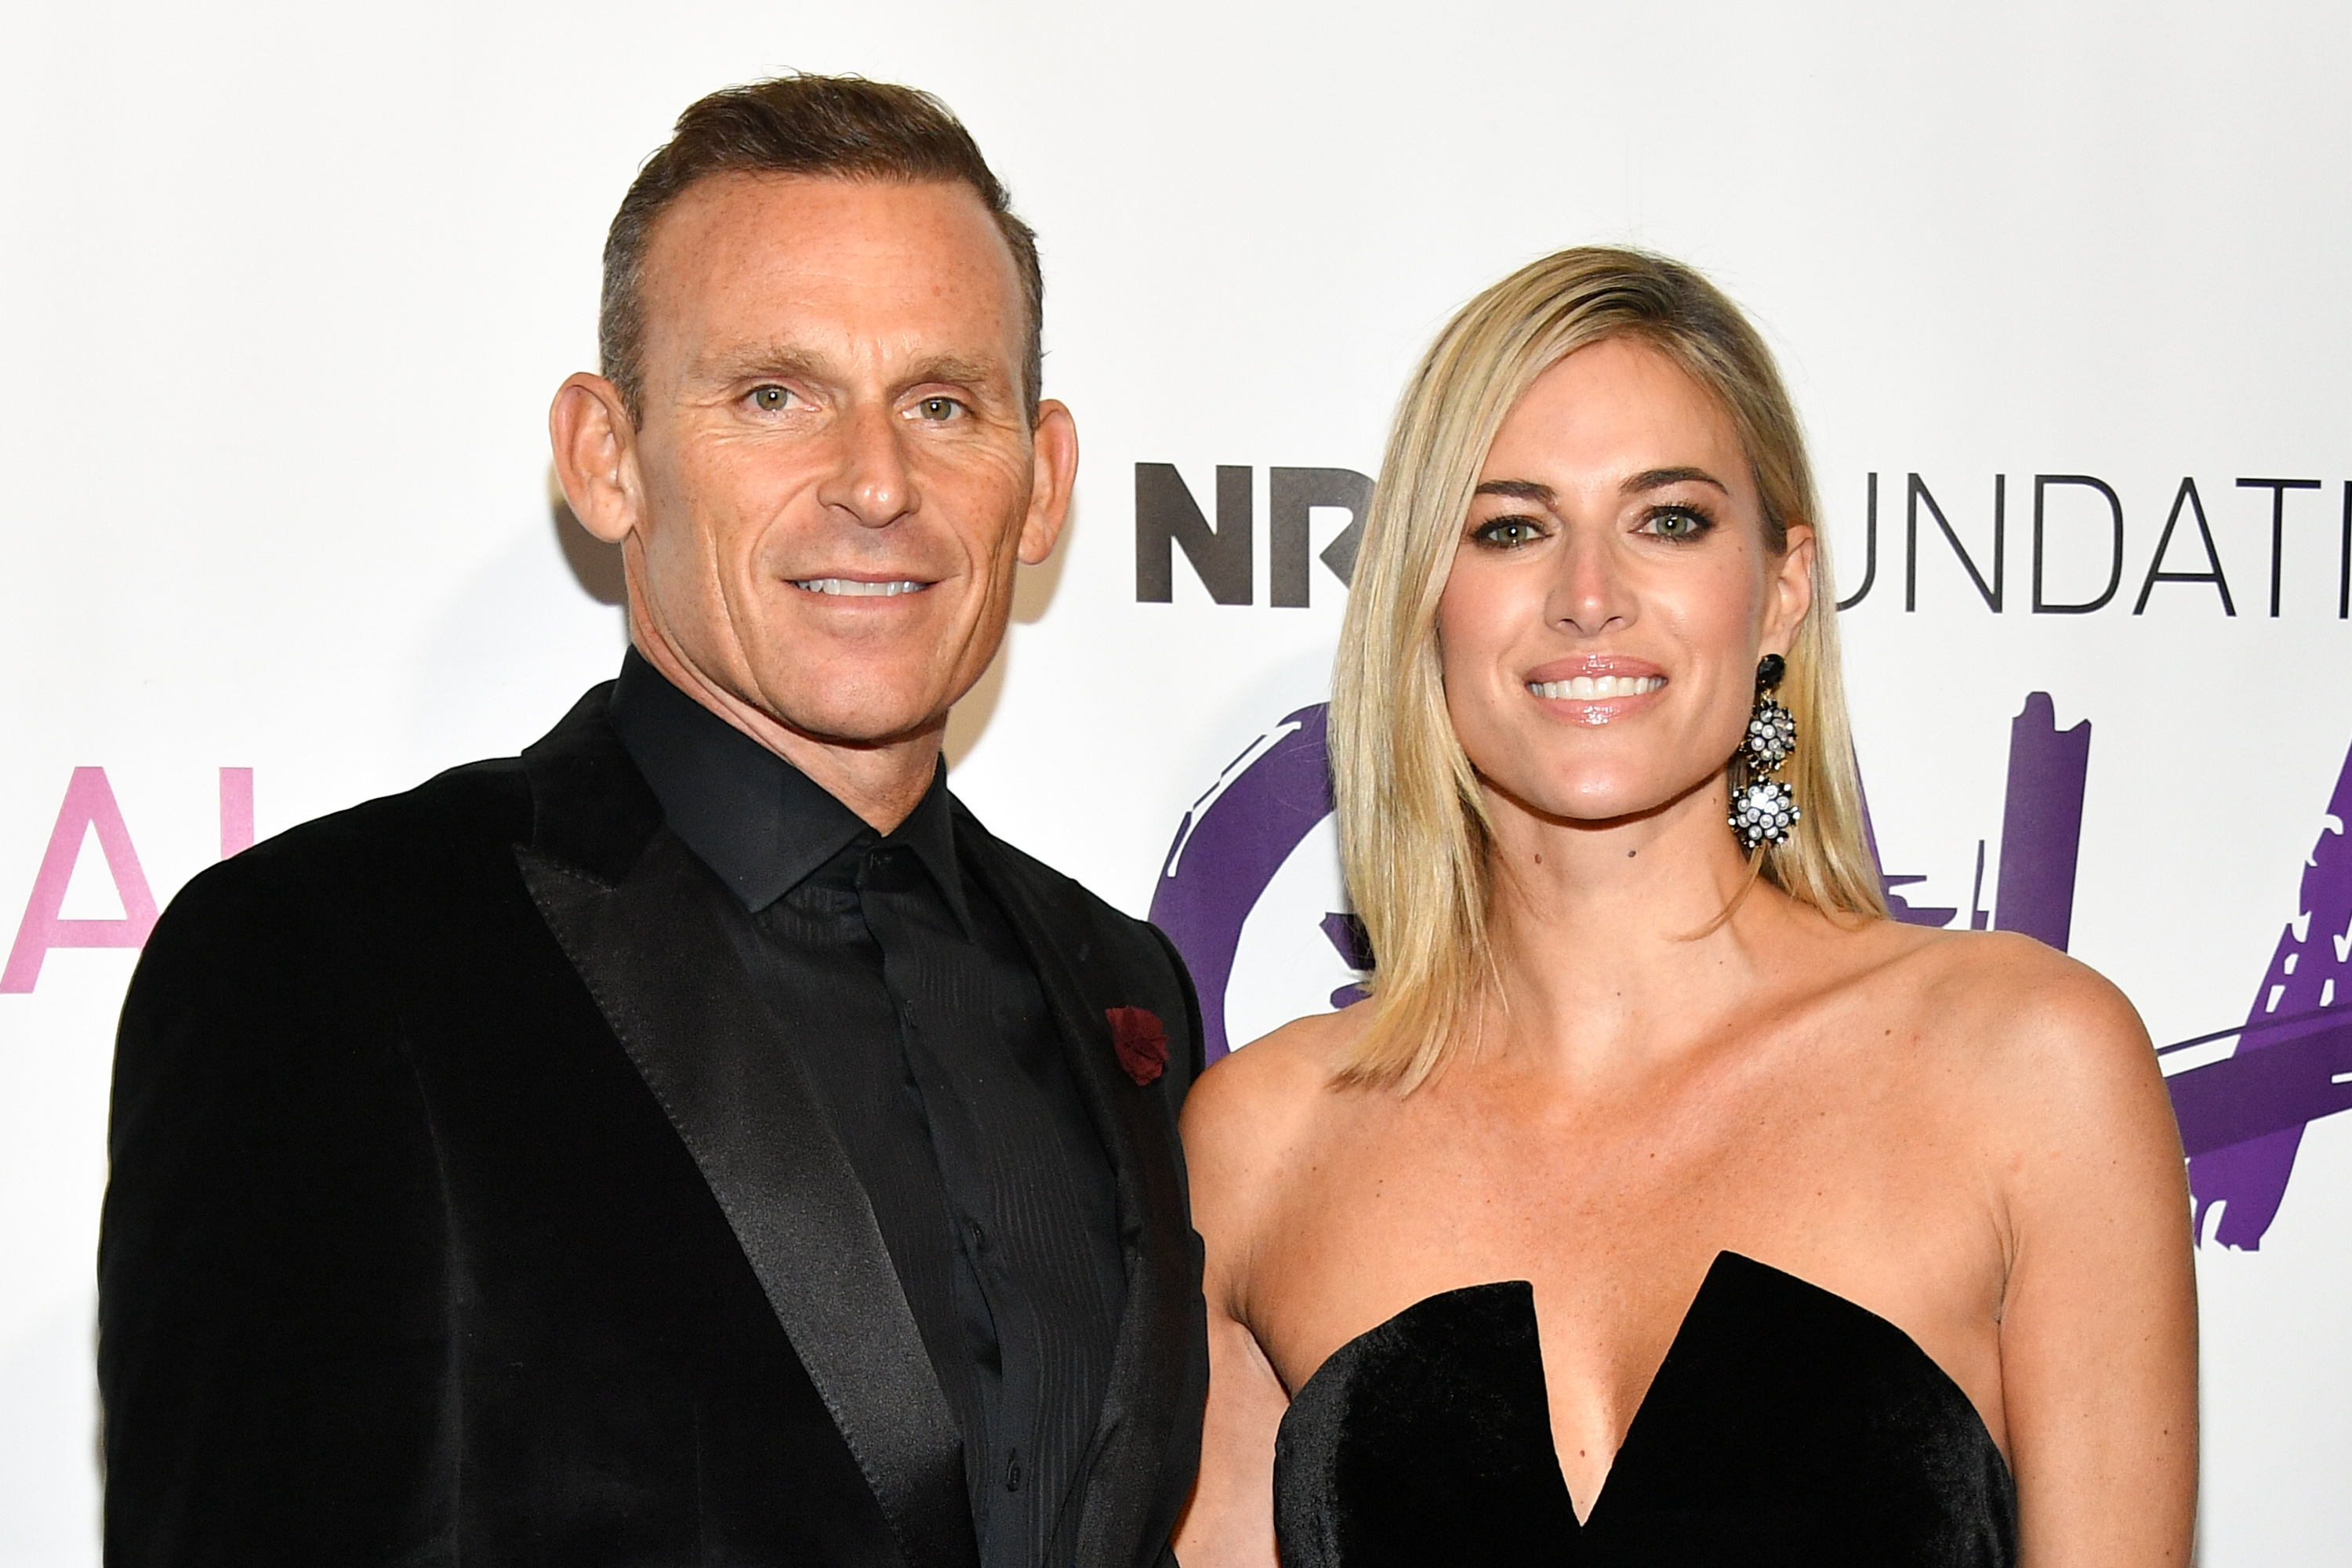 Are Kristen Taekman and Josh Taekman From RHONY Getting a Divorce? Find Out!